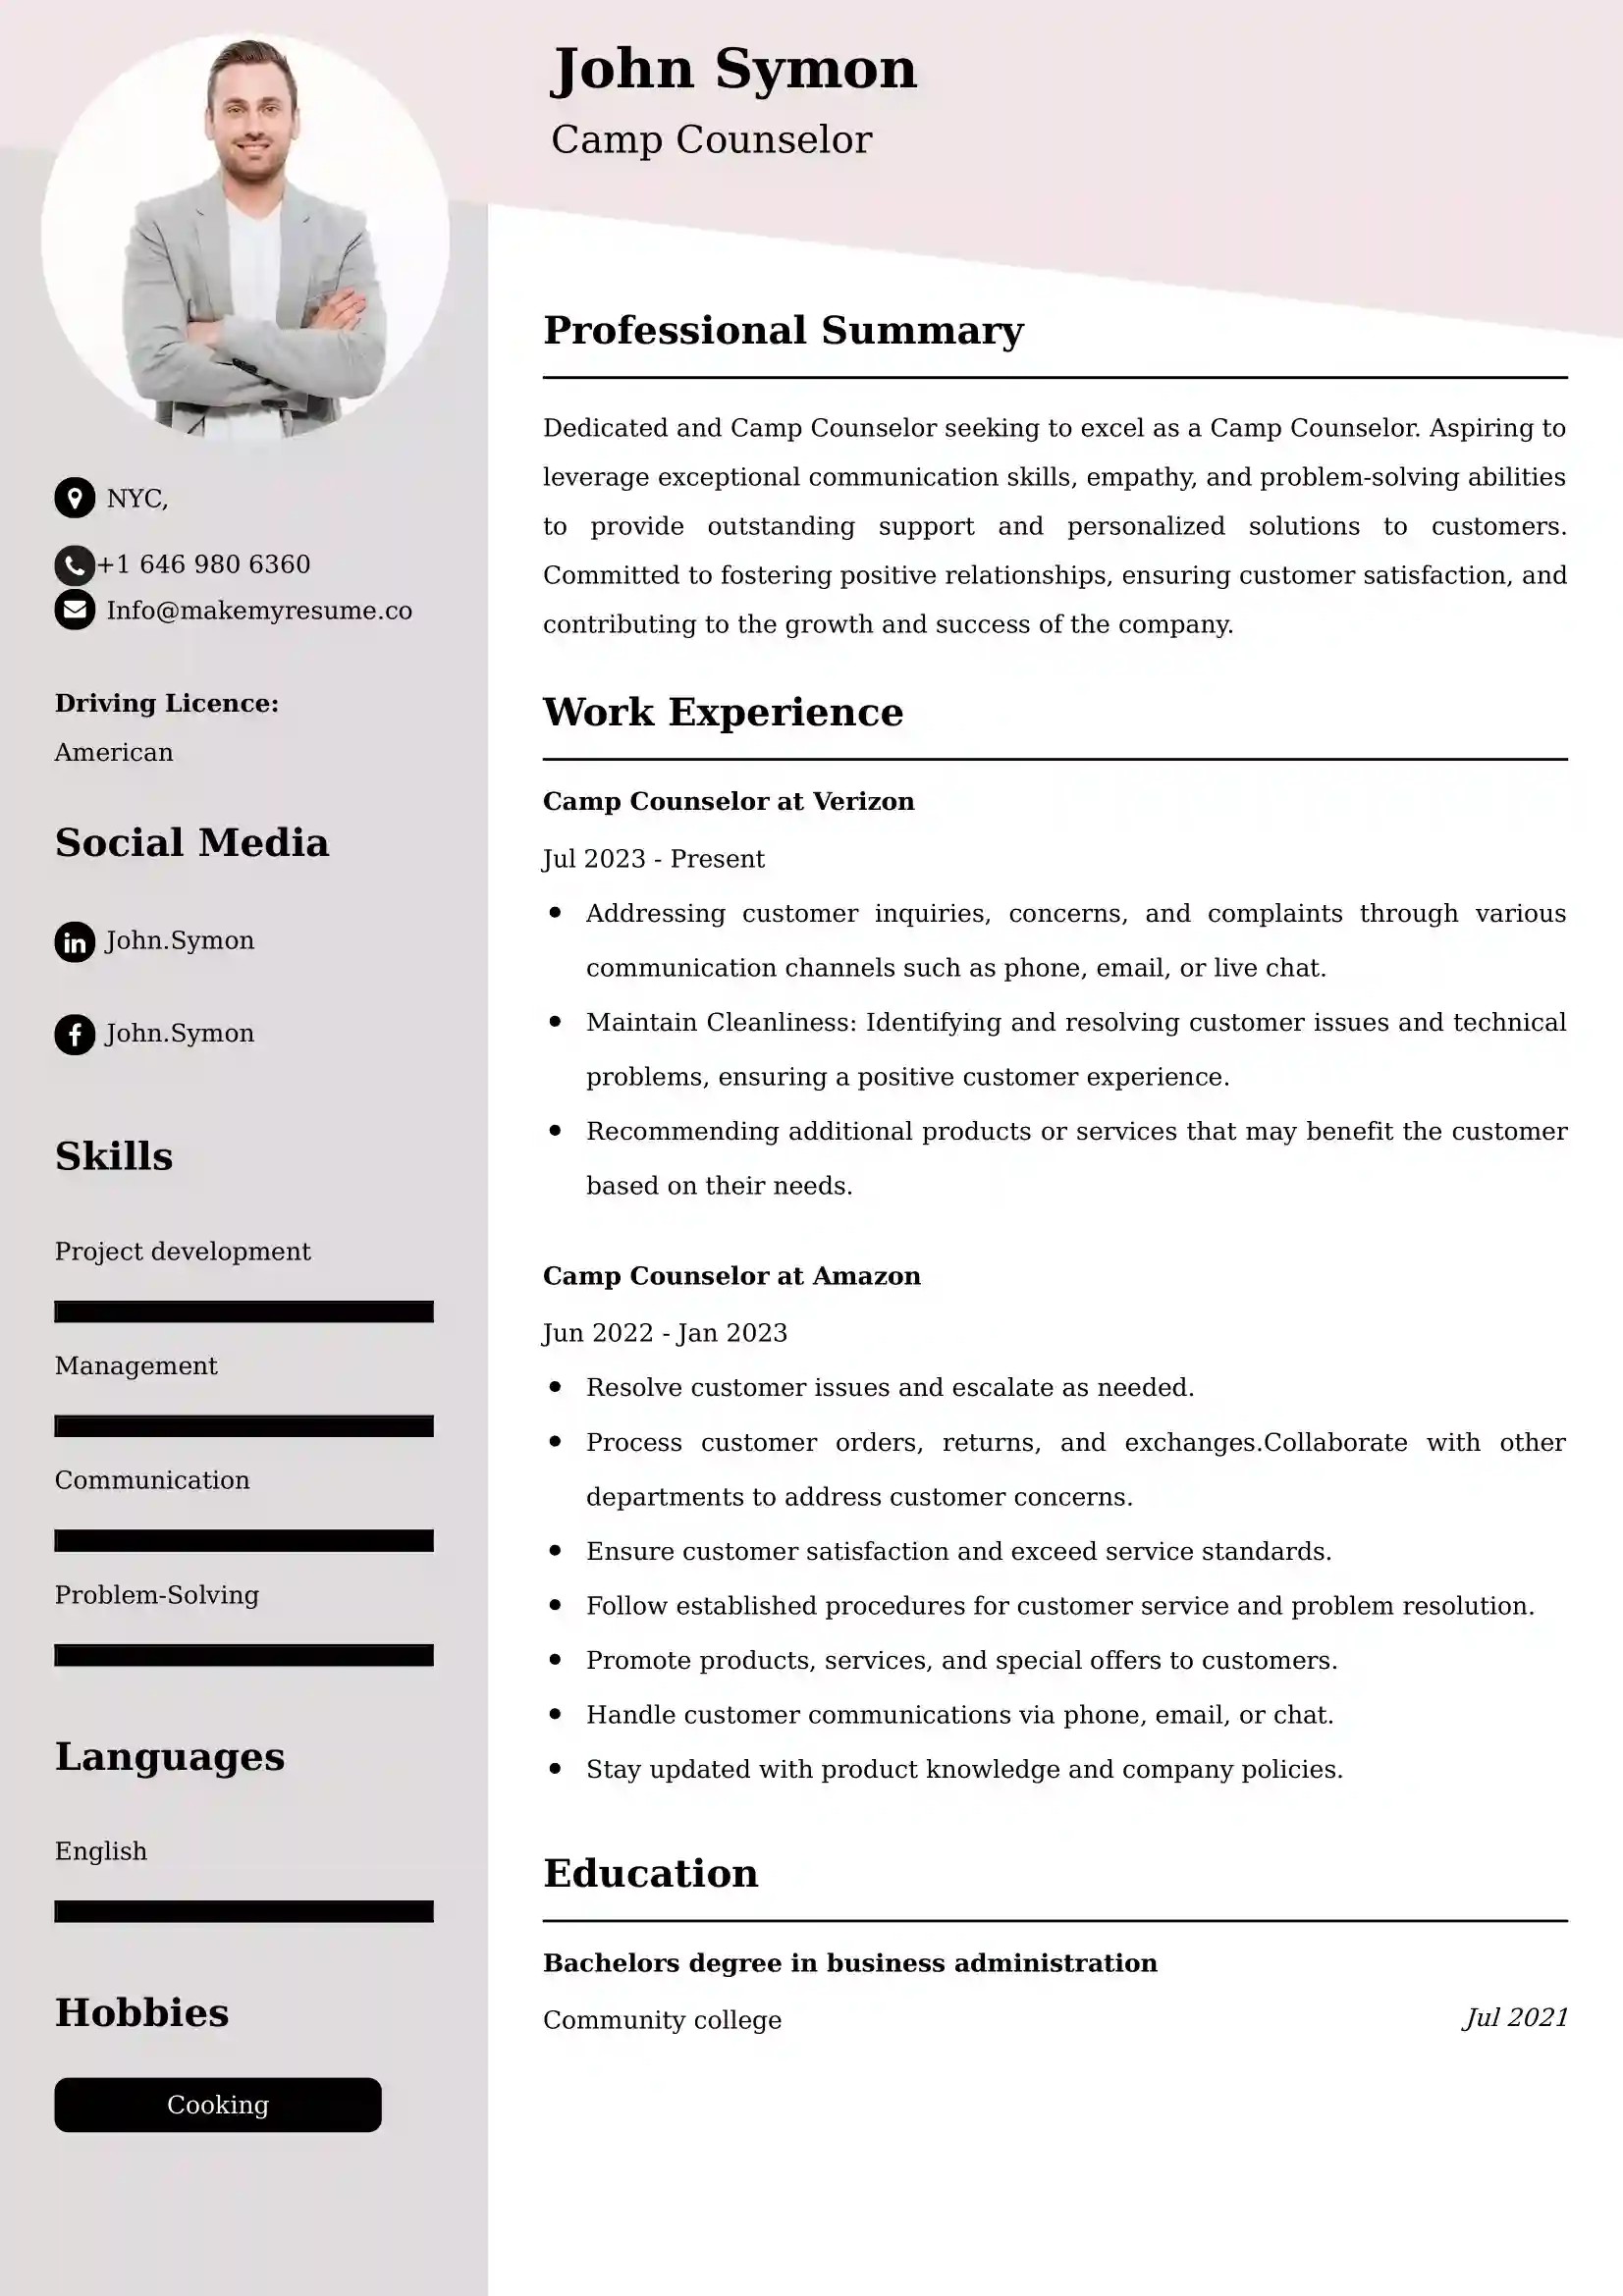 Camp Counselor Resume Examples for UK Jobs - Tips and Guide